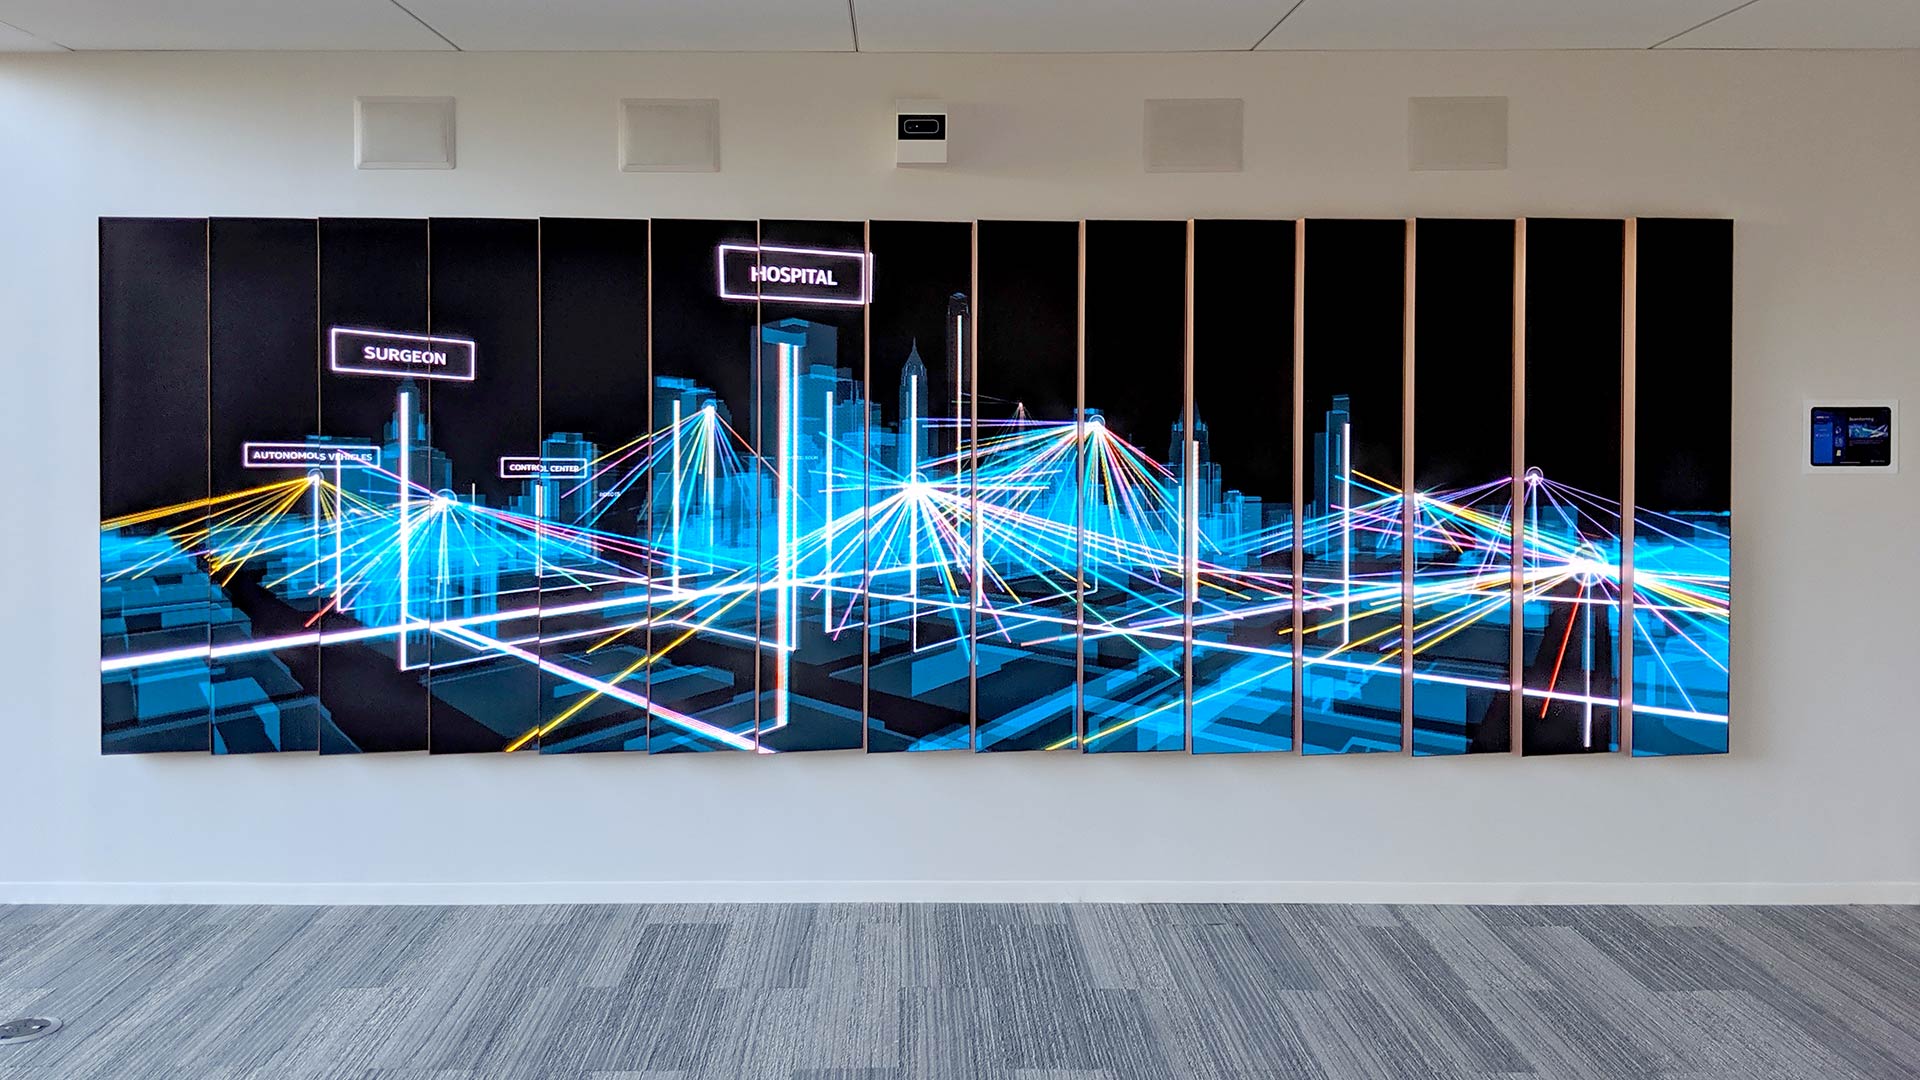 The Future City module illustrates network data, tracking visitors' motions and visually connecting them to the abstracted urban infrastructure.